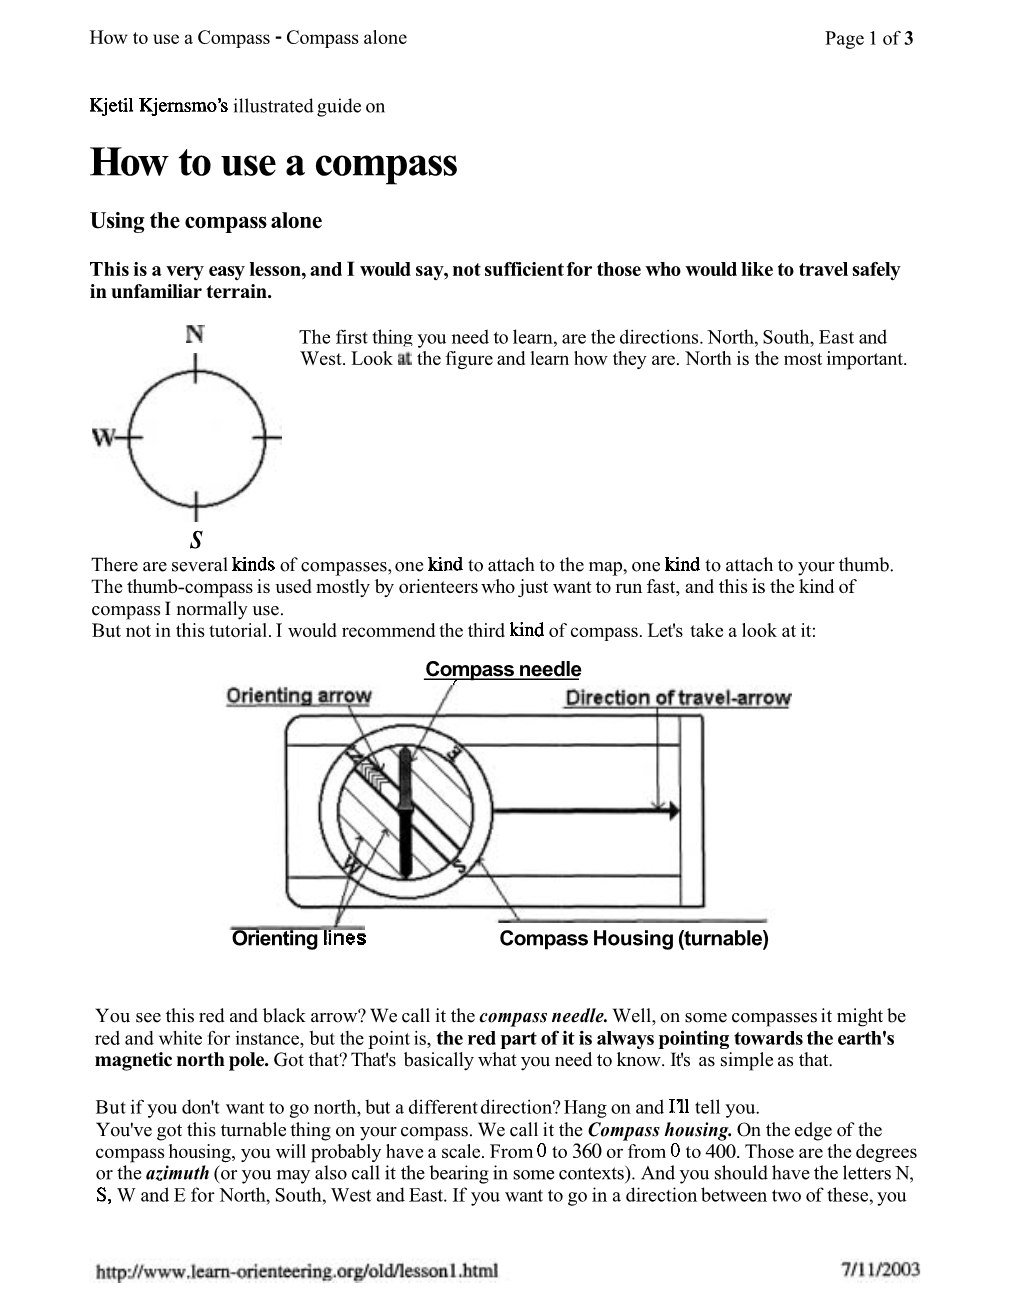 How to Use a Compass - Compass Alone Page 1 of 3